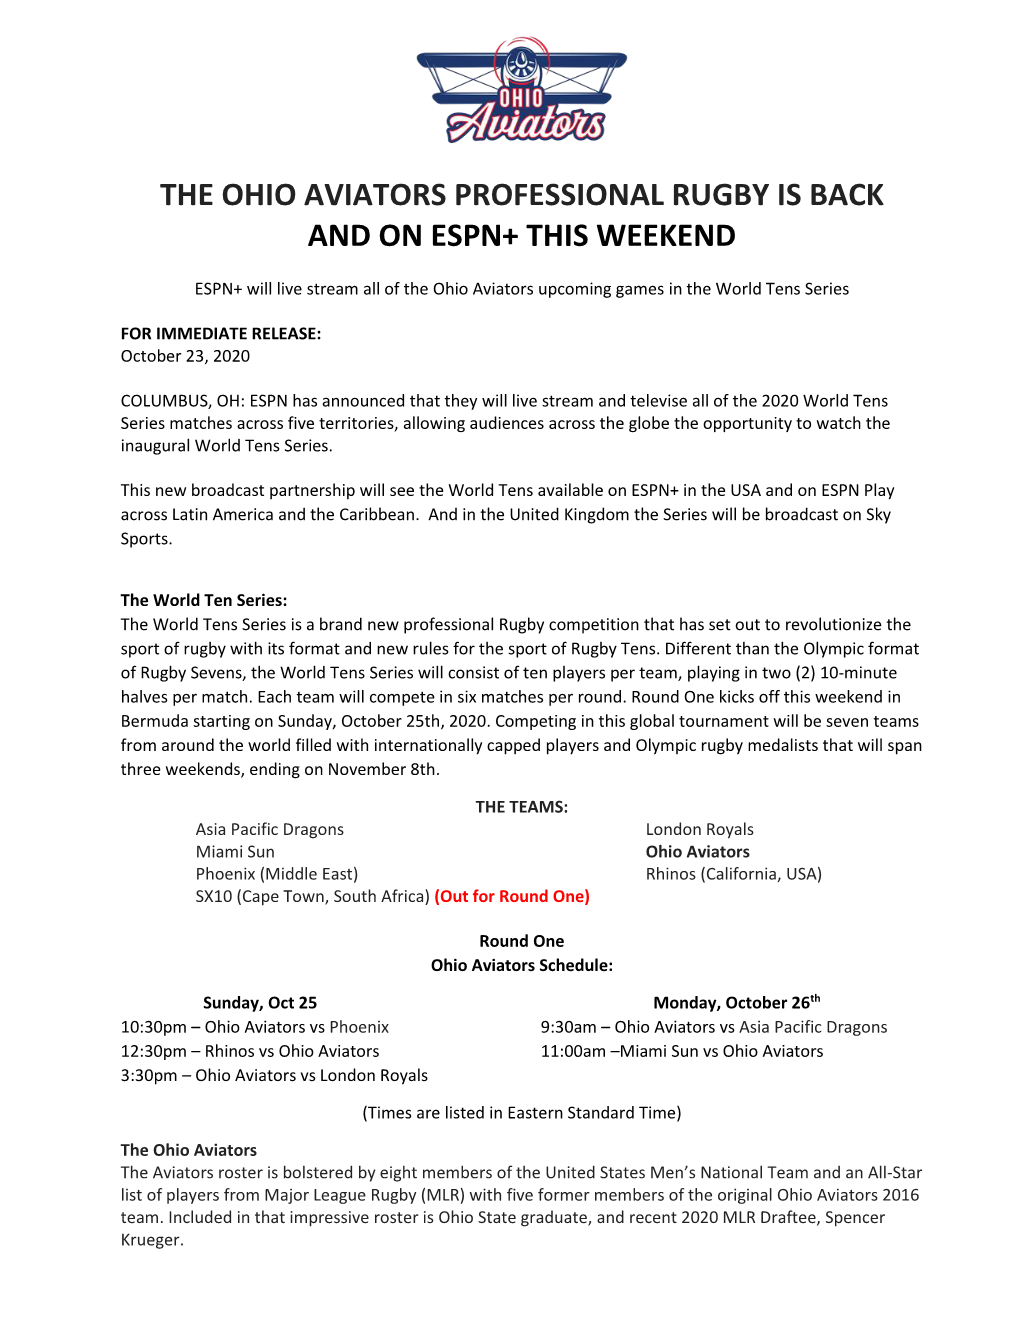 The Ohio Aviators Professional Rugby Is Back and on Espn+ This Weekend